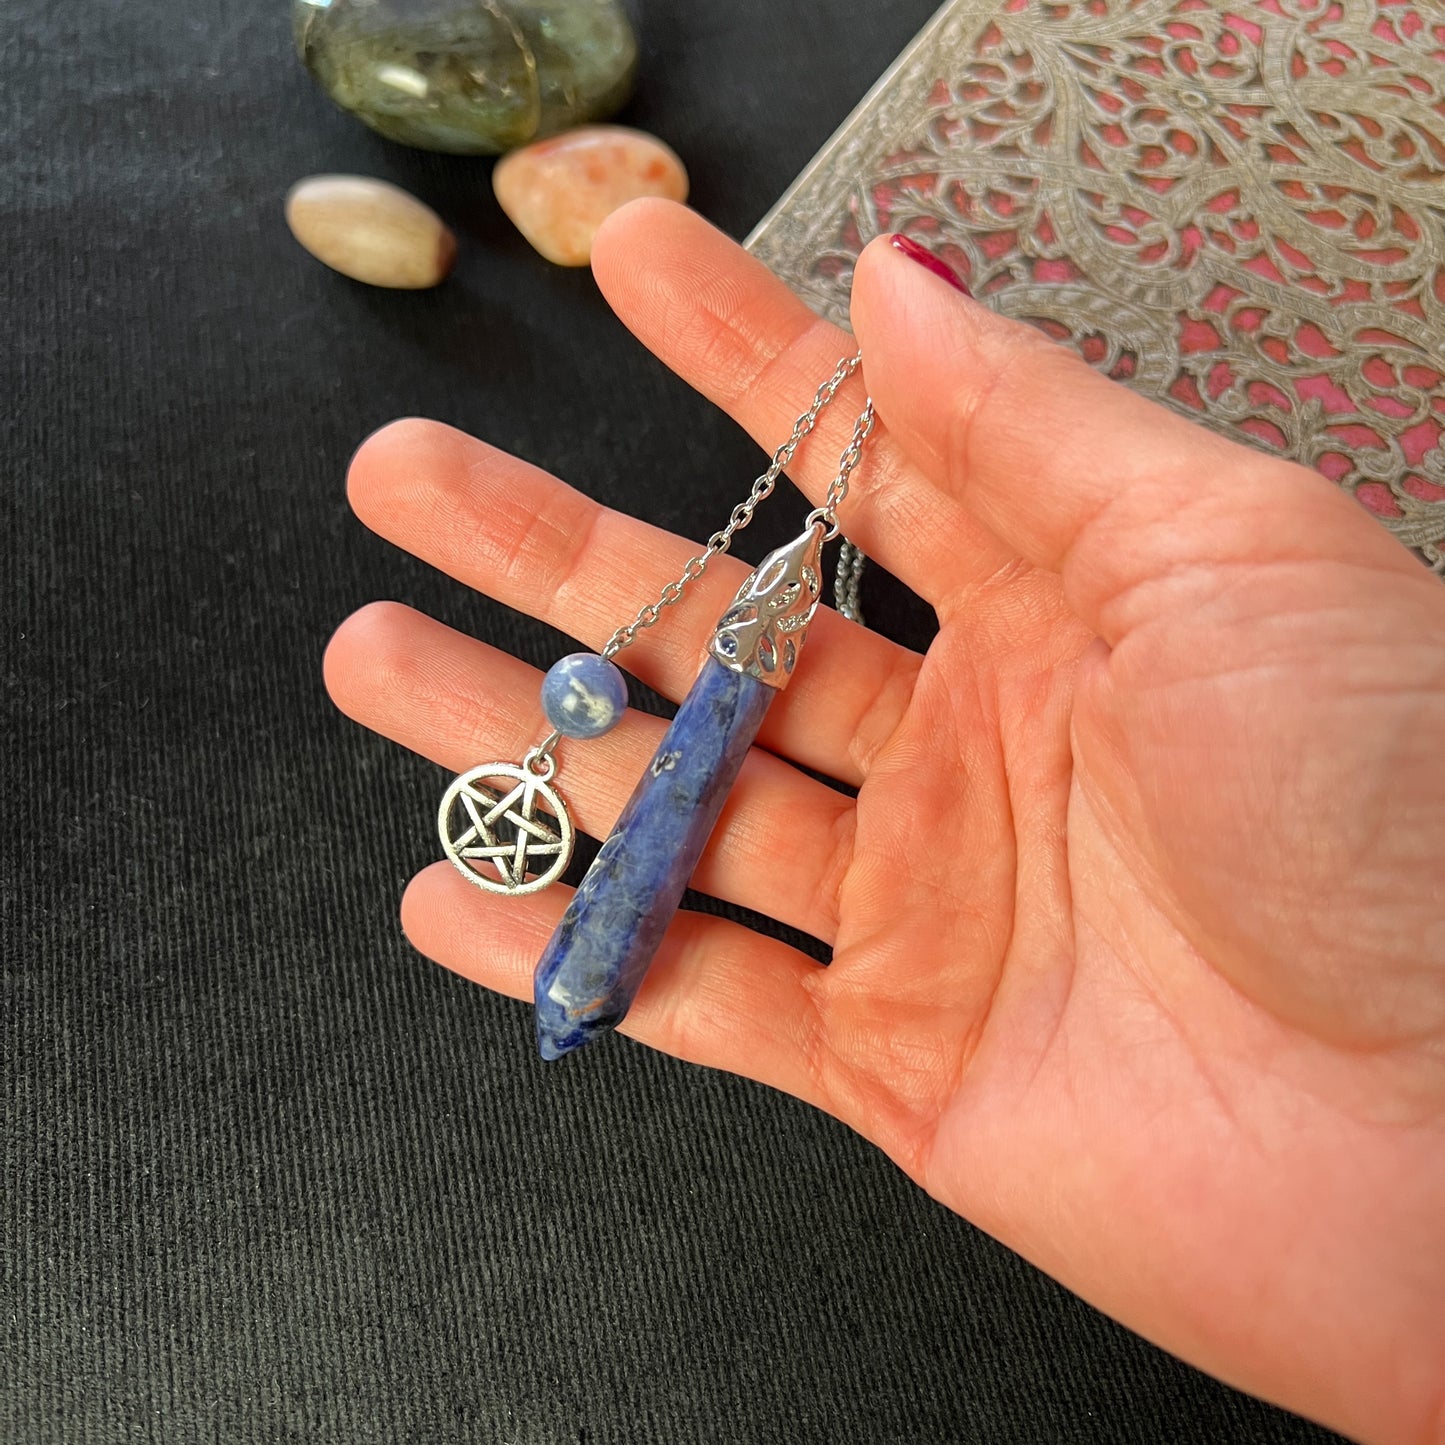 Sodalite and pentacle dowsing pendulum - The French Witch shop